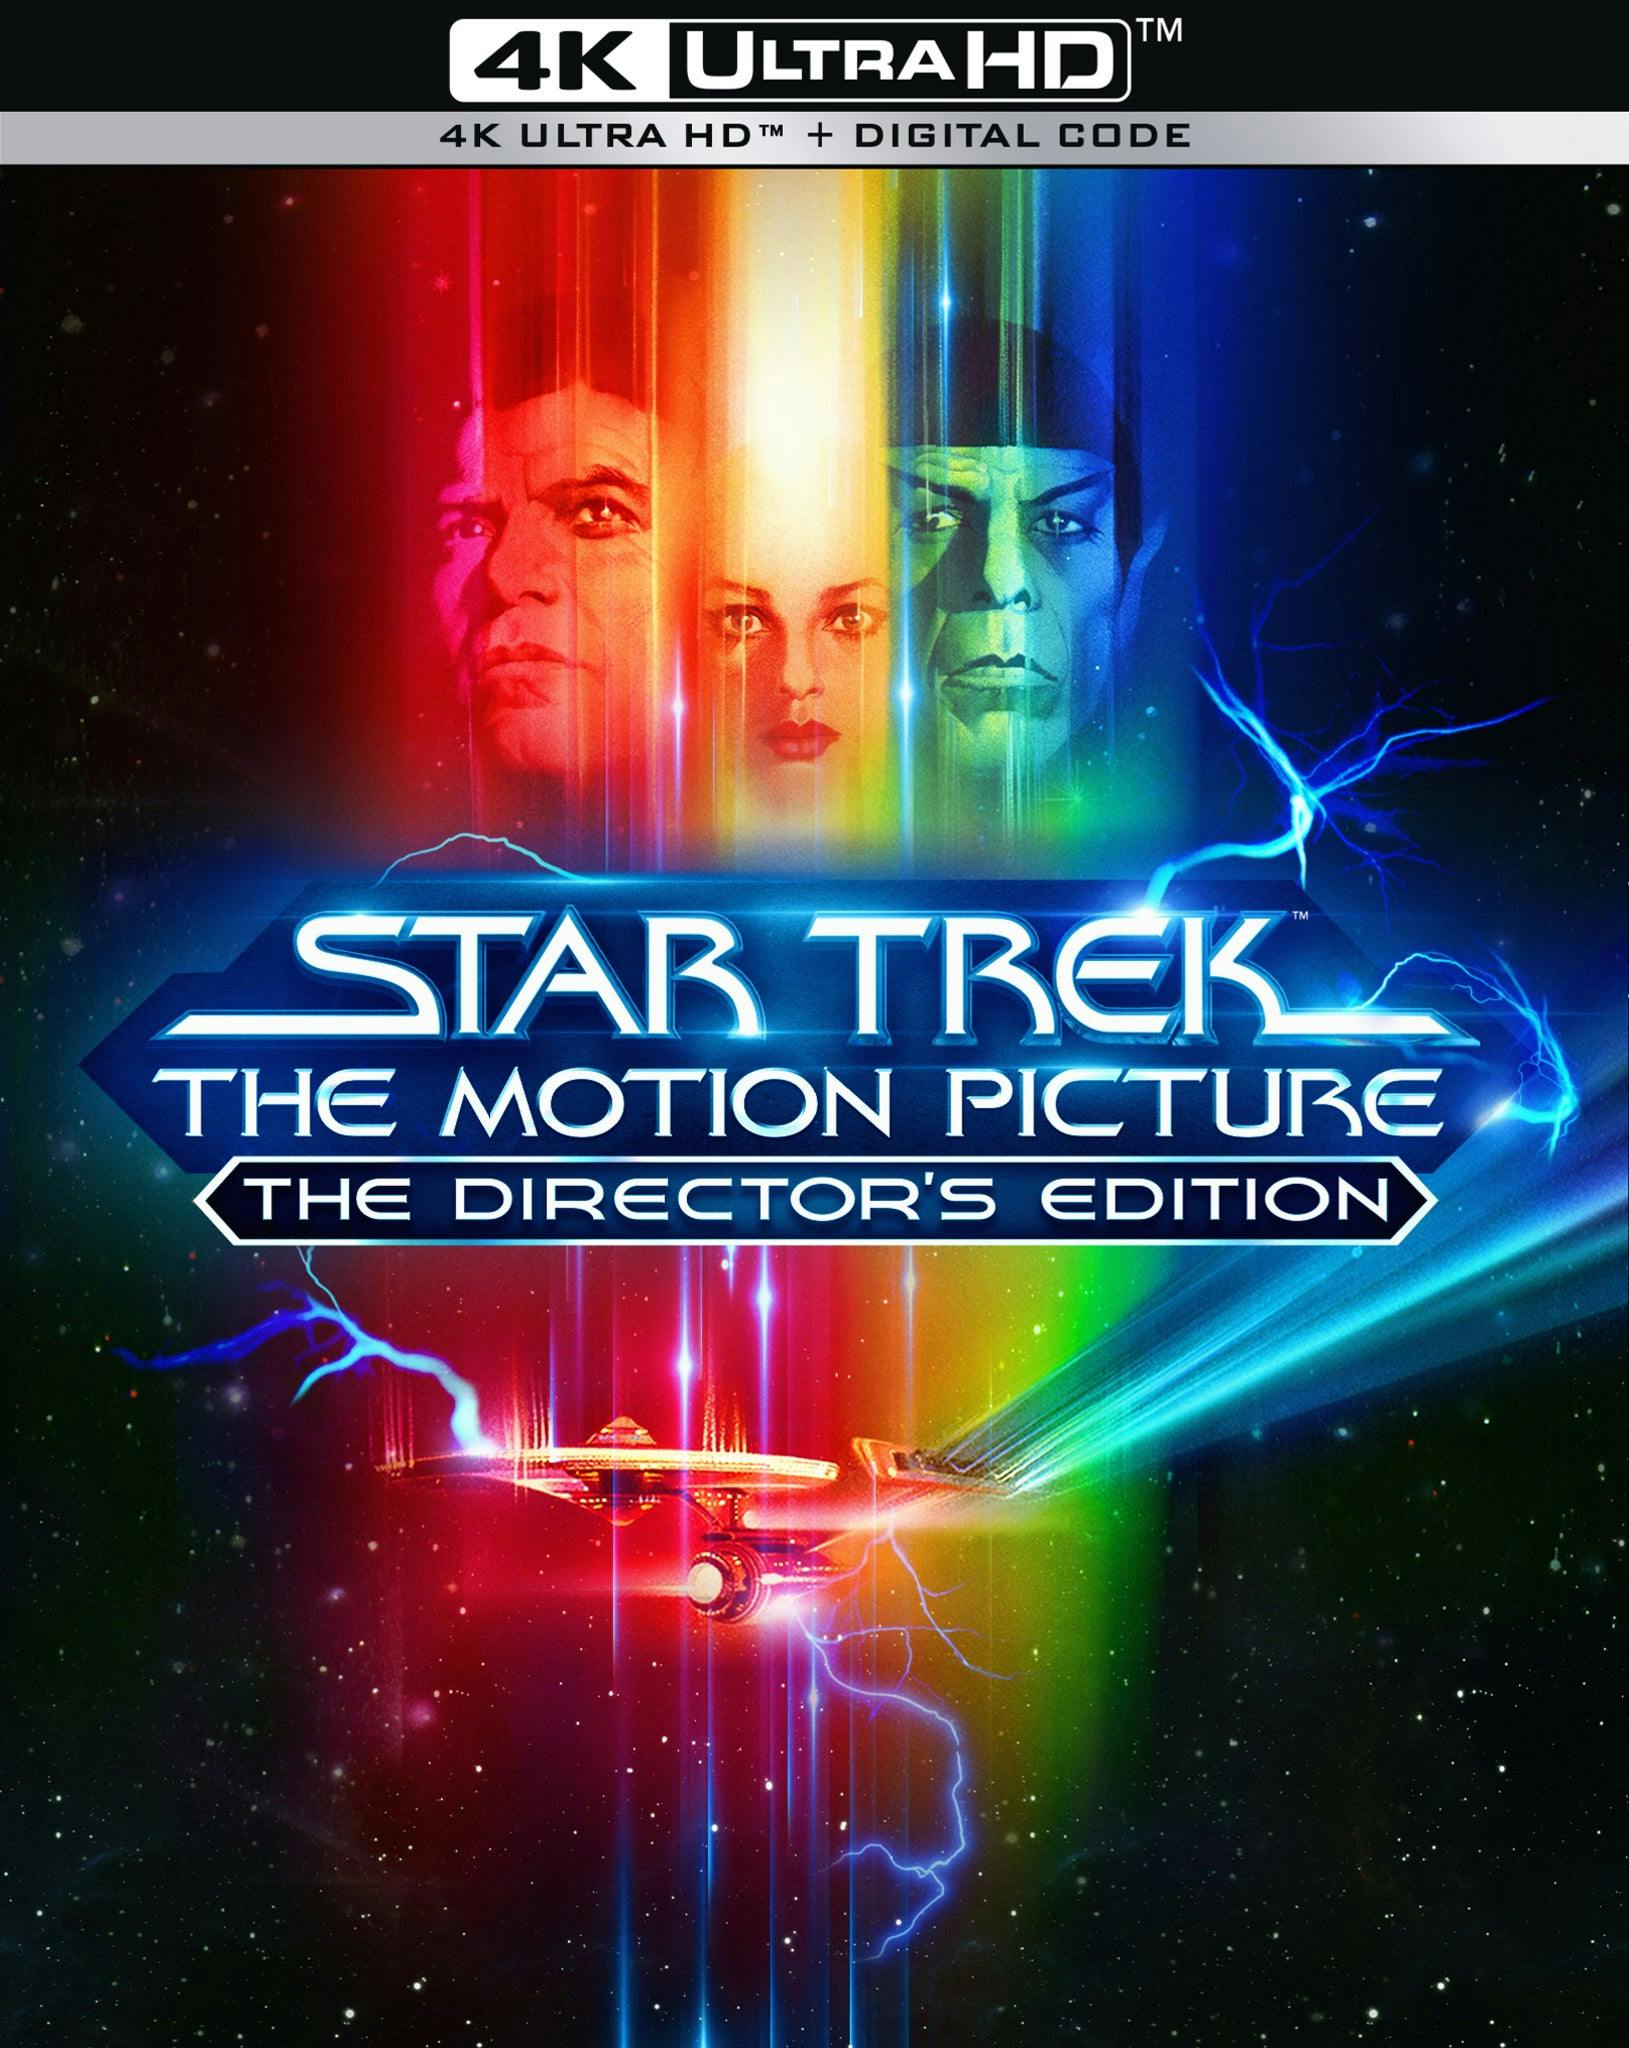 The 4K Ultra HD cover for Star Trek: The Motion Picture - Director's Edition